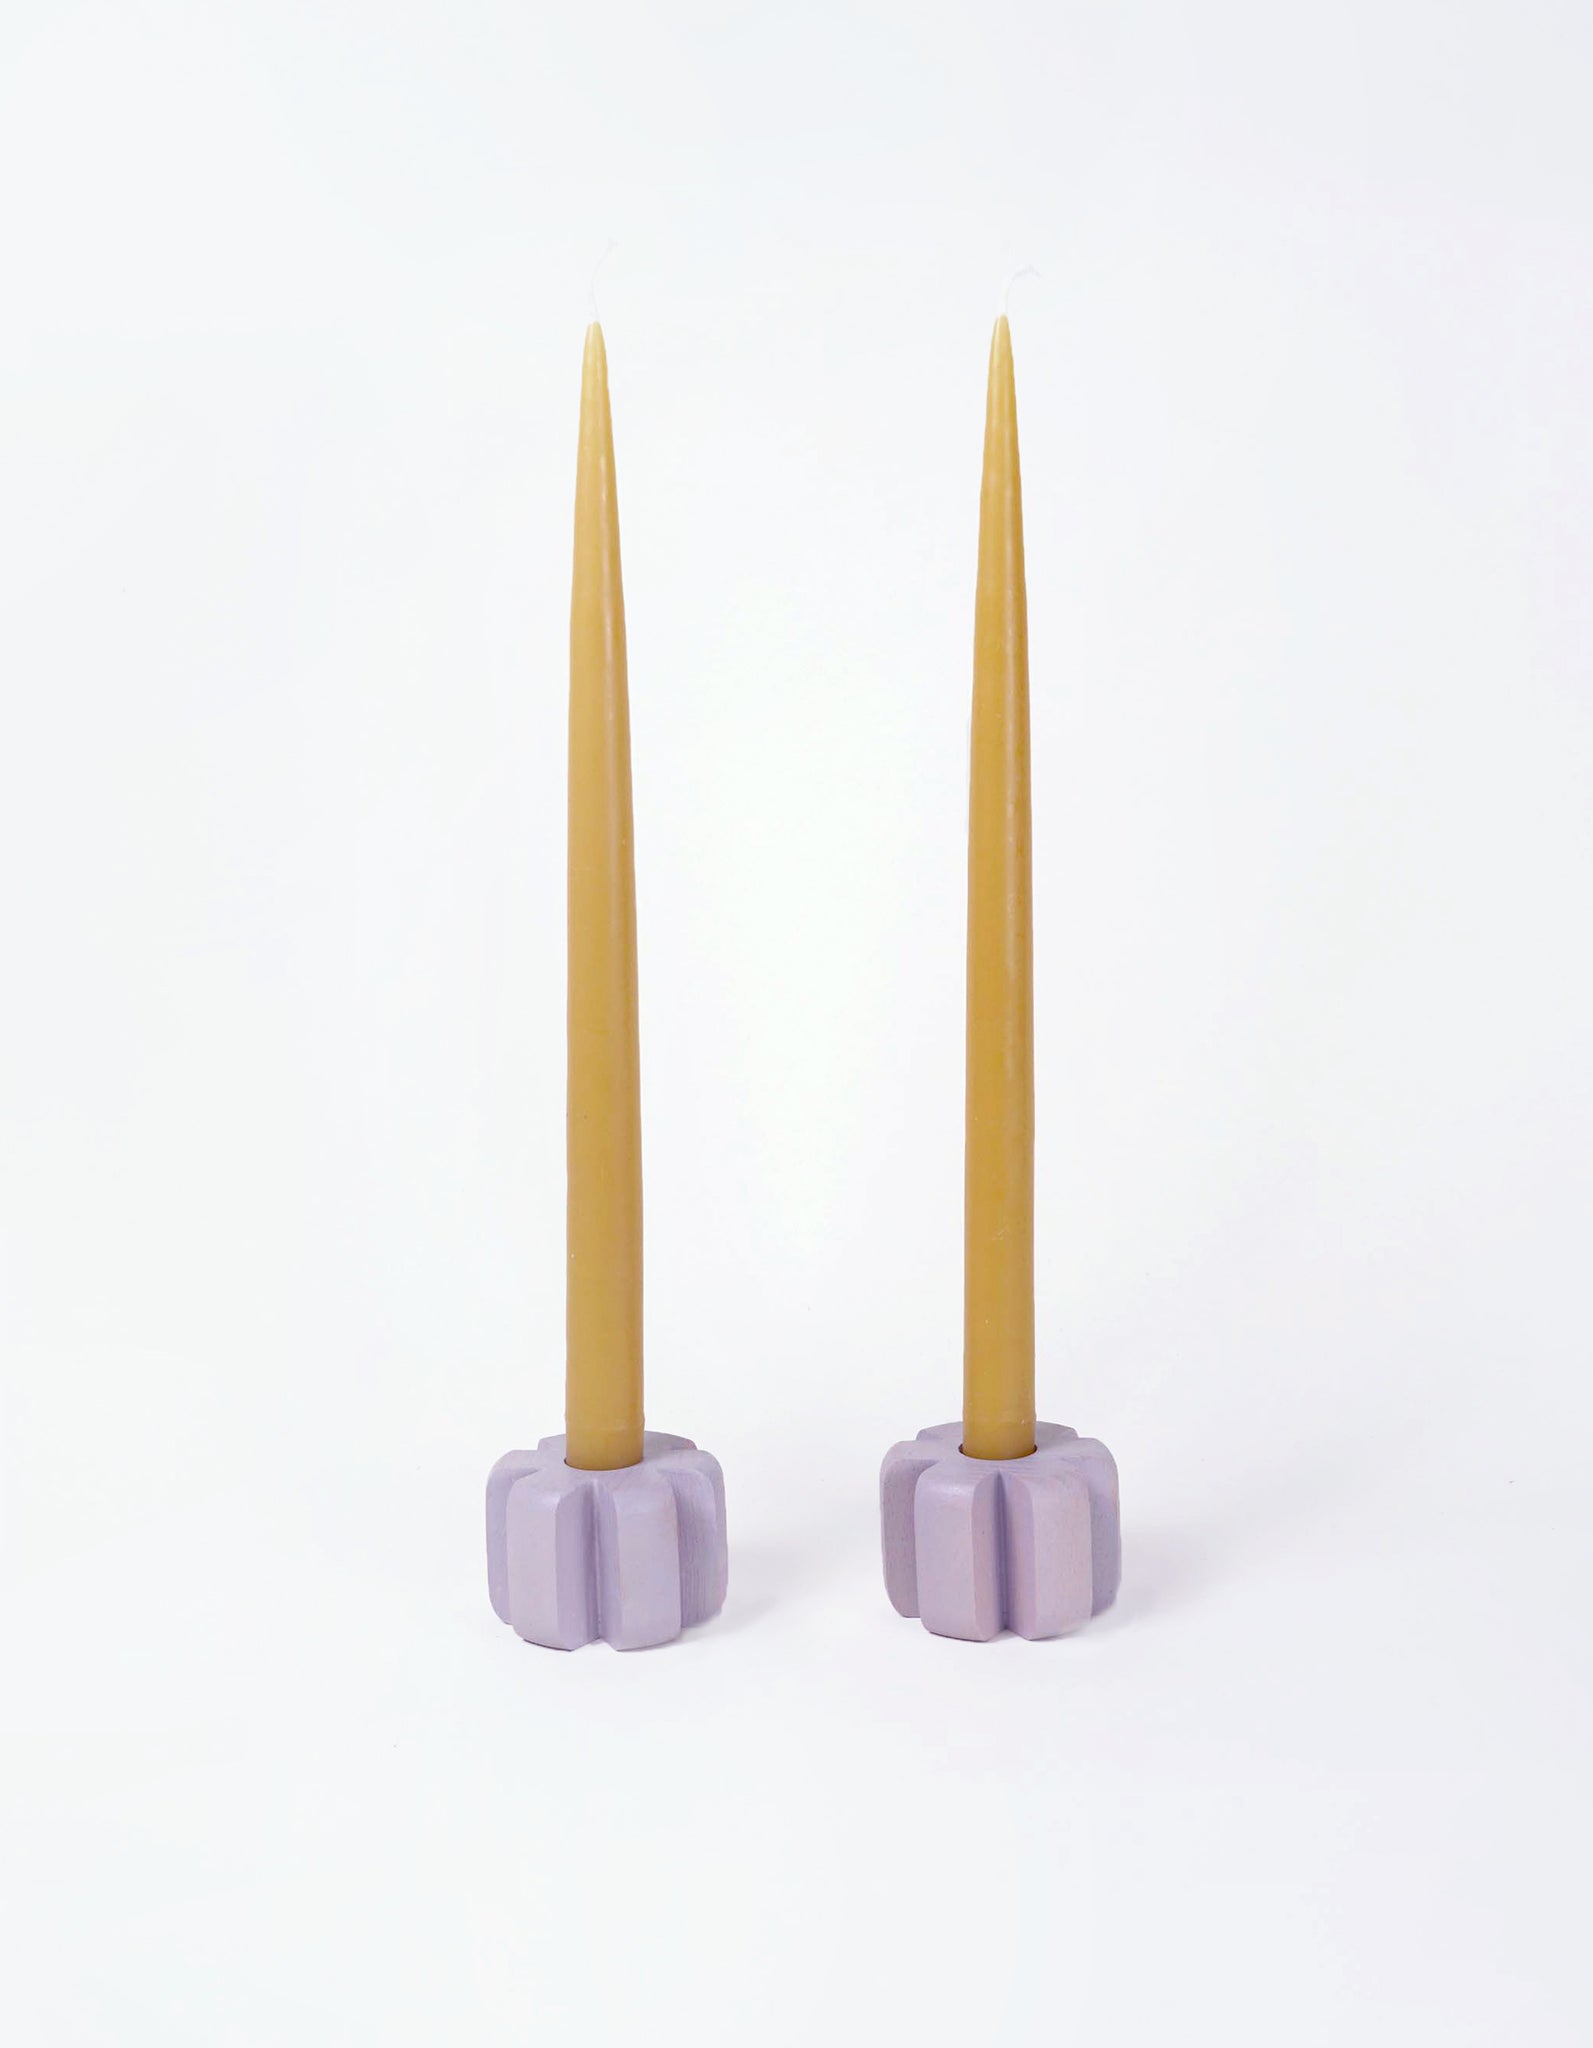 Asterisk Candleholder Pair - Colorful